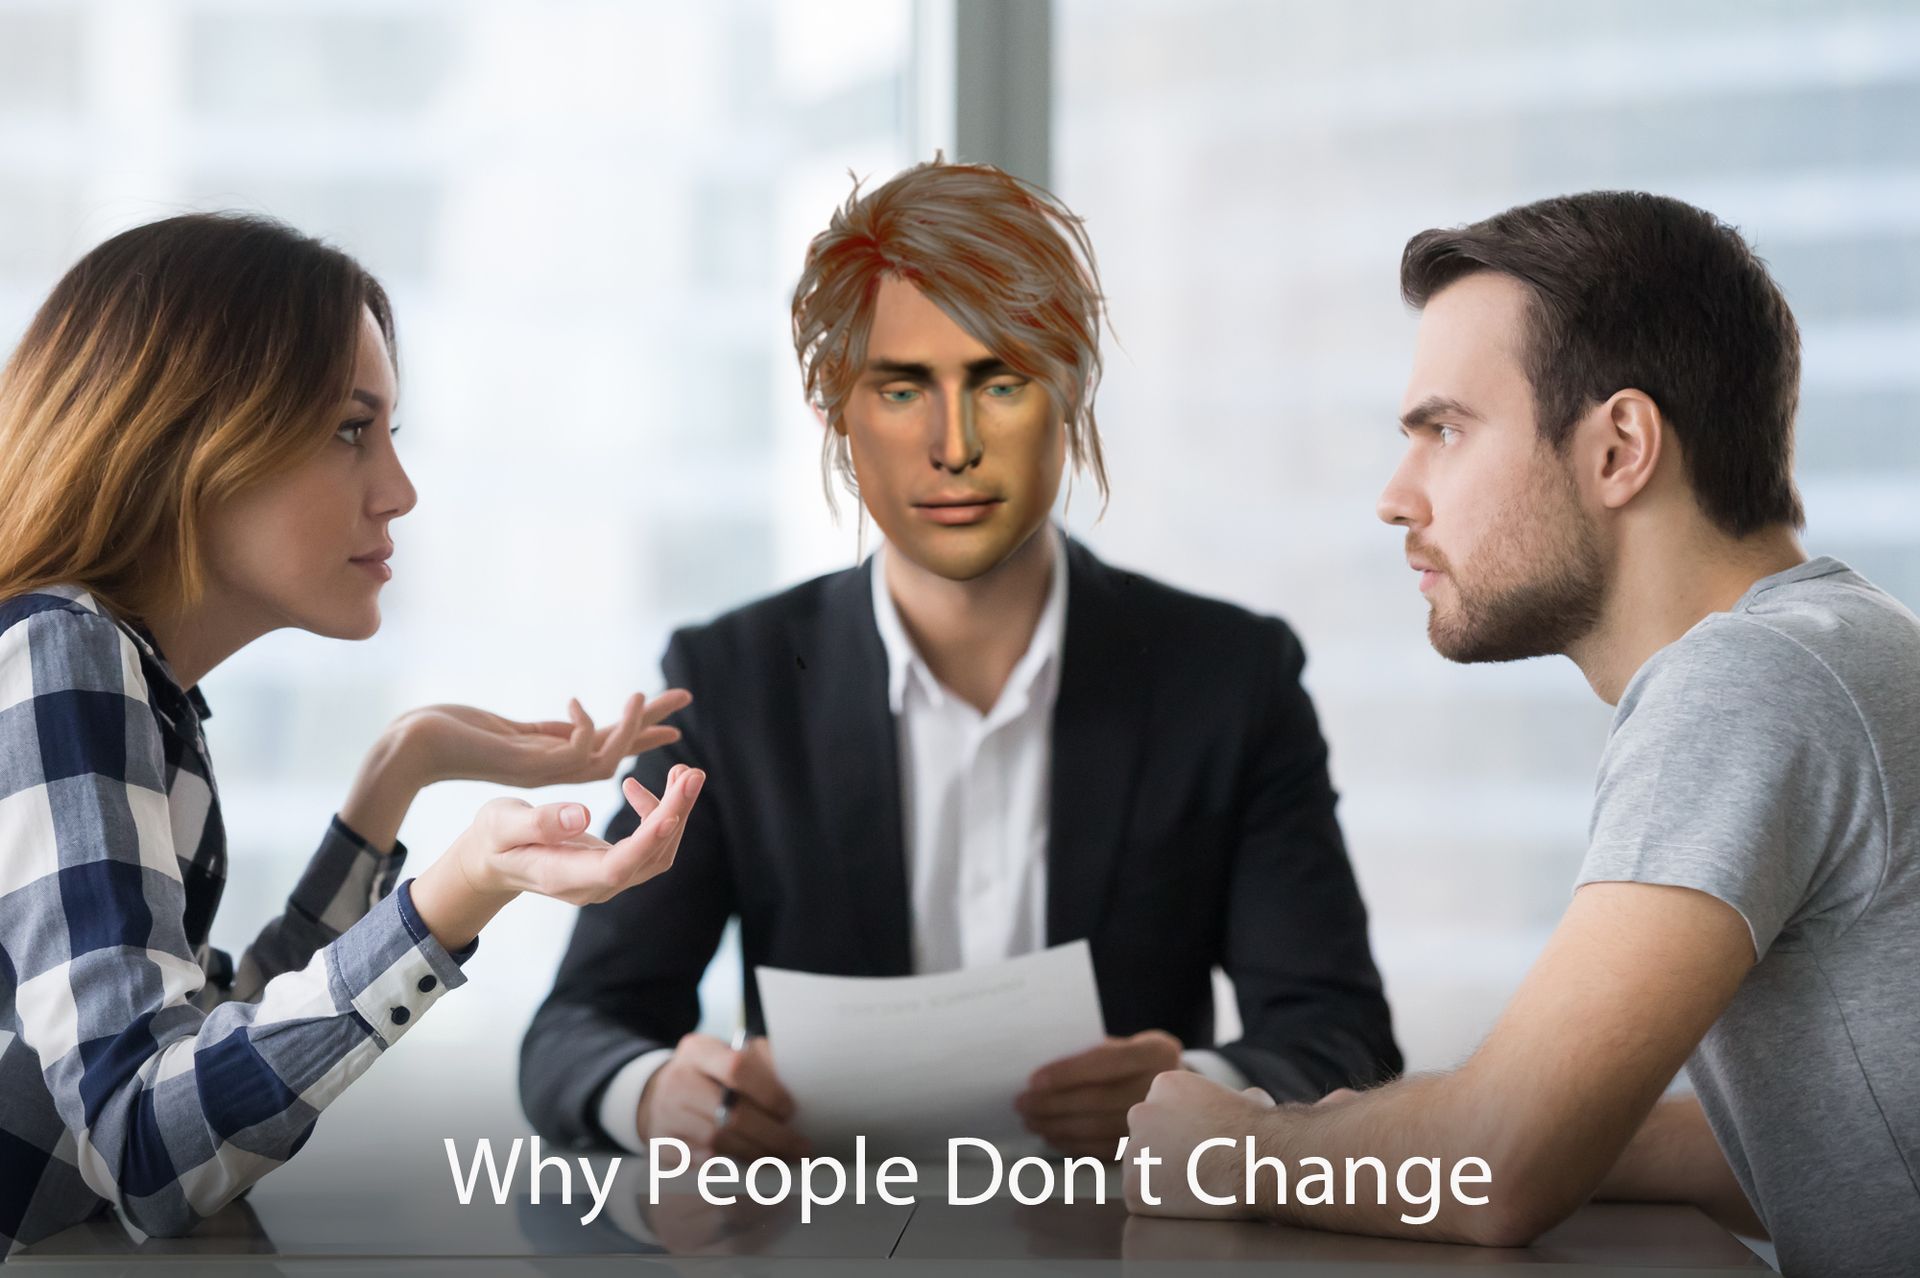 Why People Don't Change by Jordan Canon